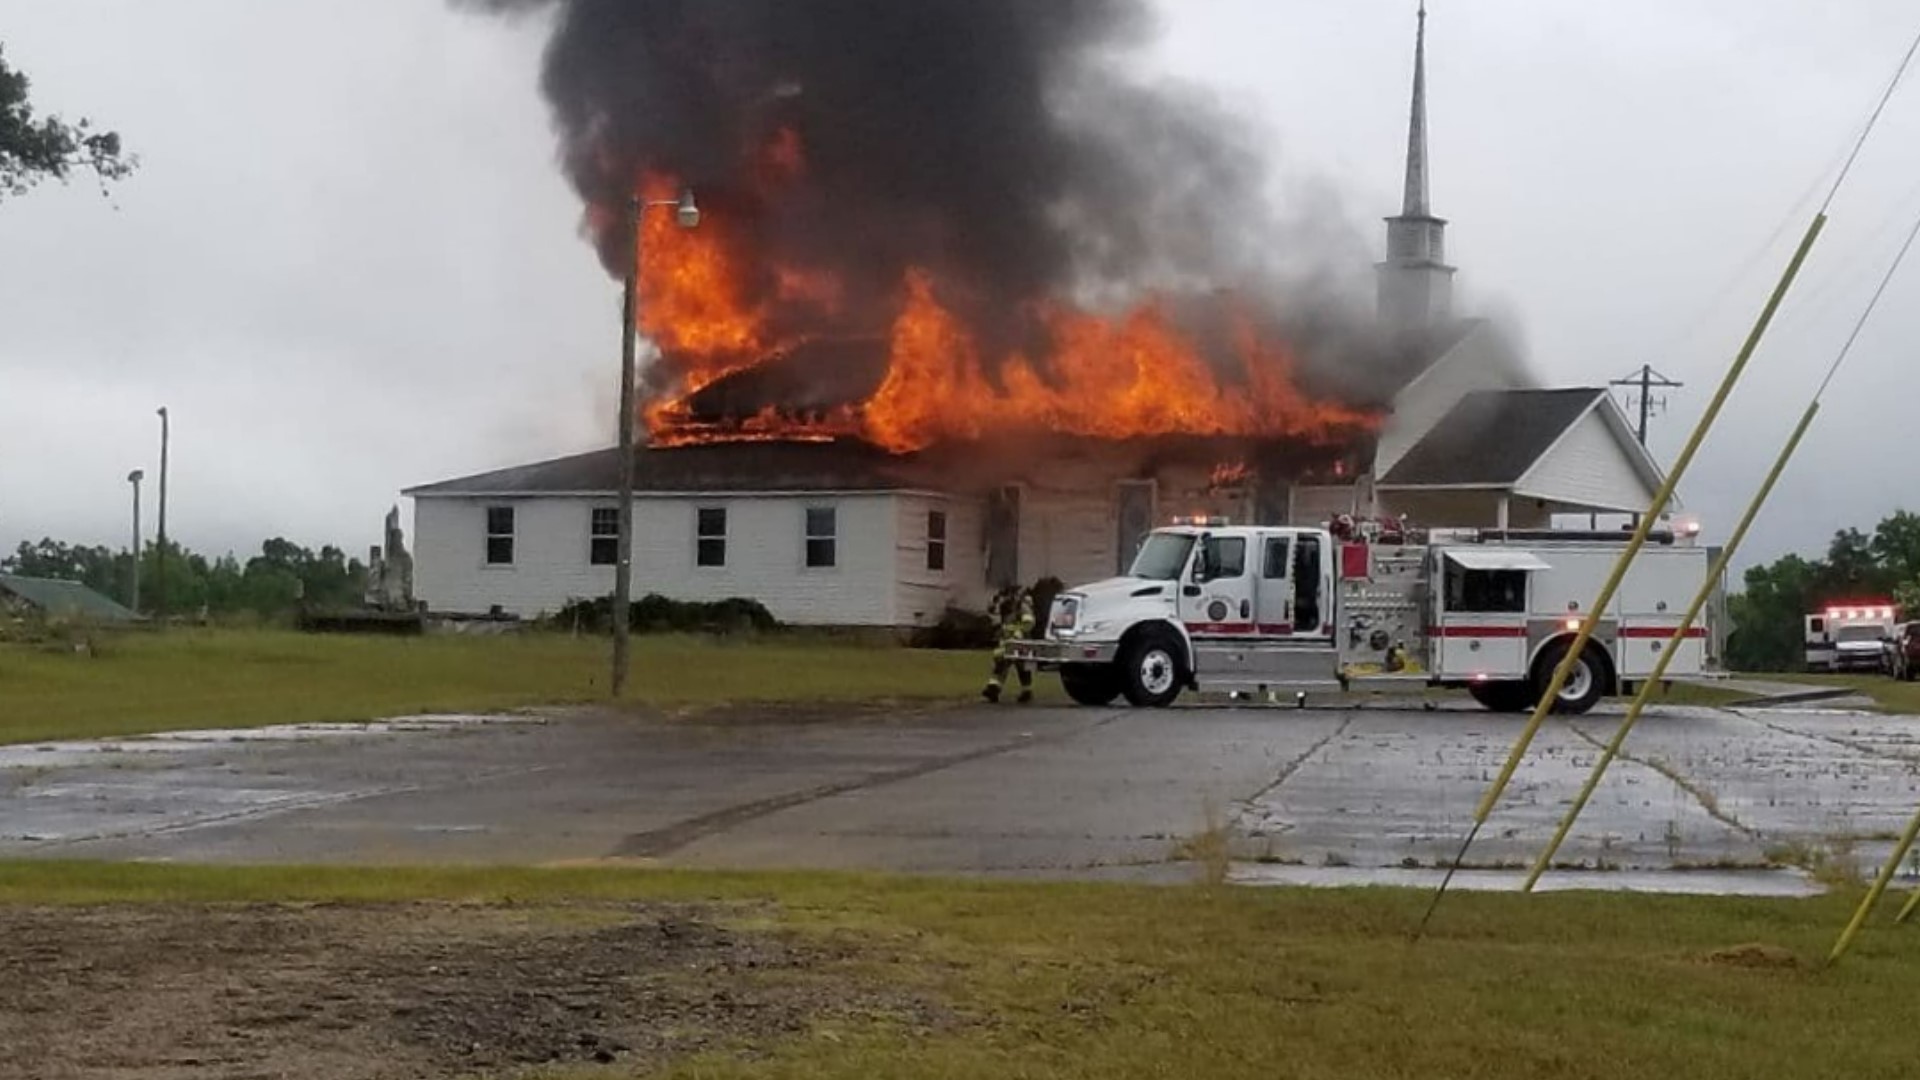 Crews in Johnson County responded to a church fire near the Laurens County line Friday morning.